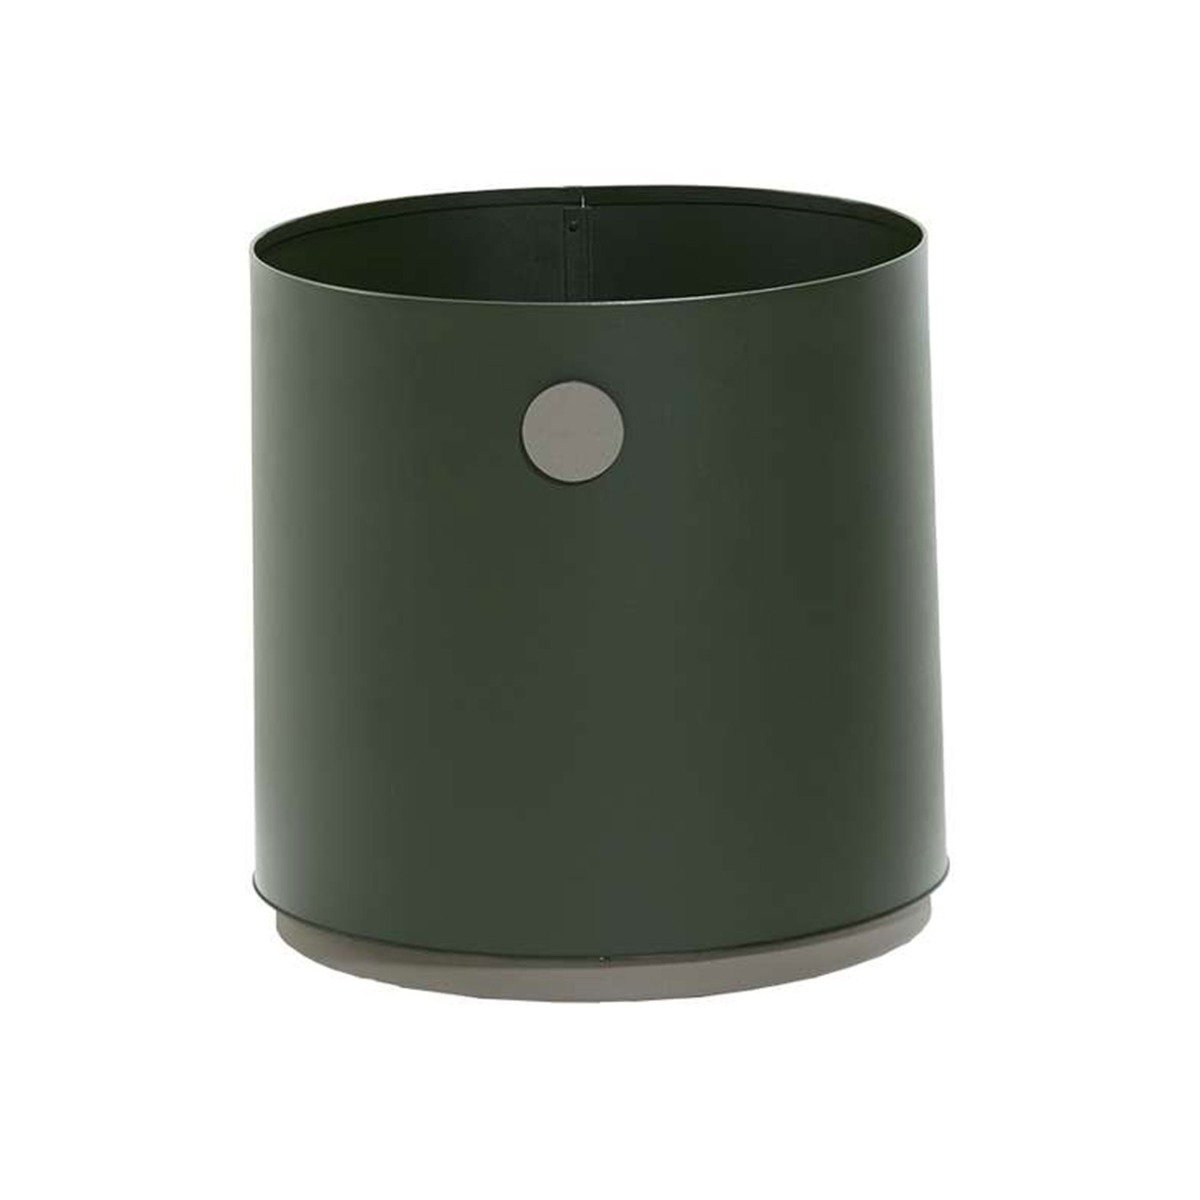 Cane Line Grow Small Planter, Green Metal | Barker & Stonehouse